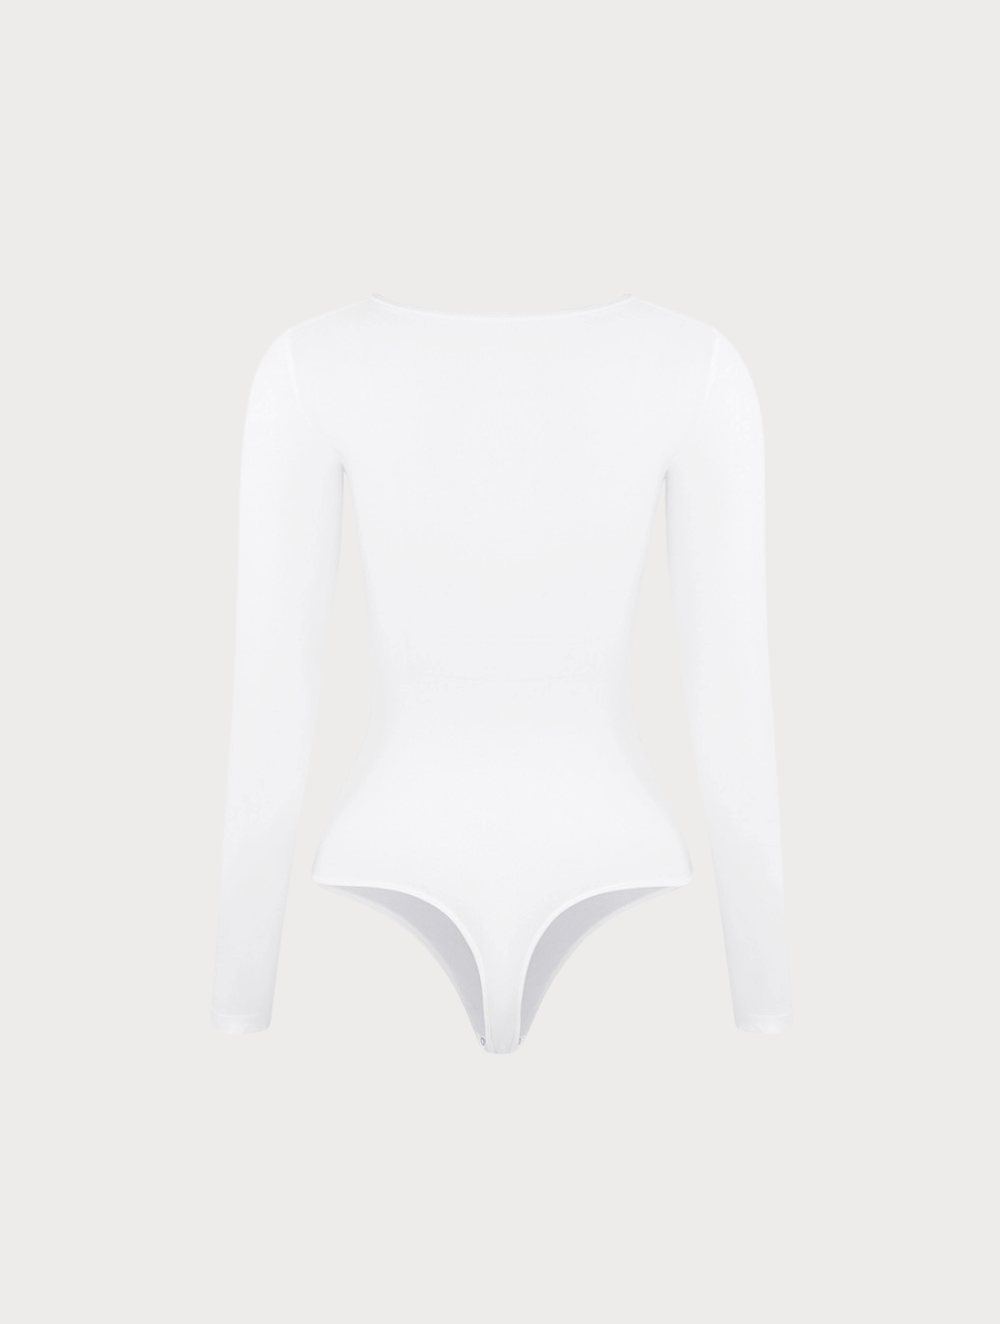 Every-Day Long Sleeve Shaping Bodysuit